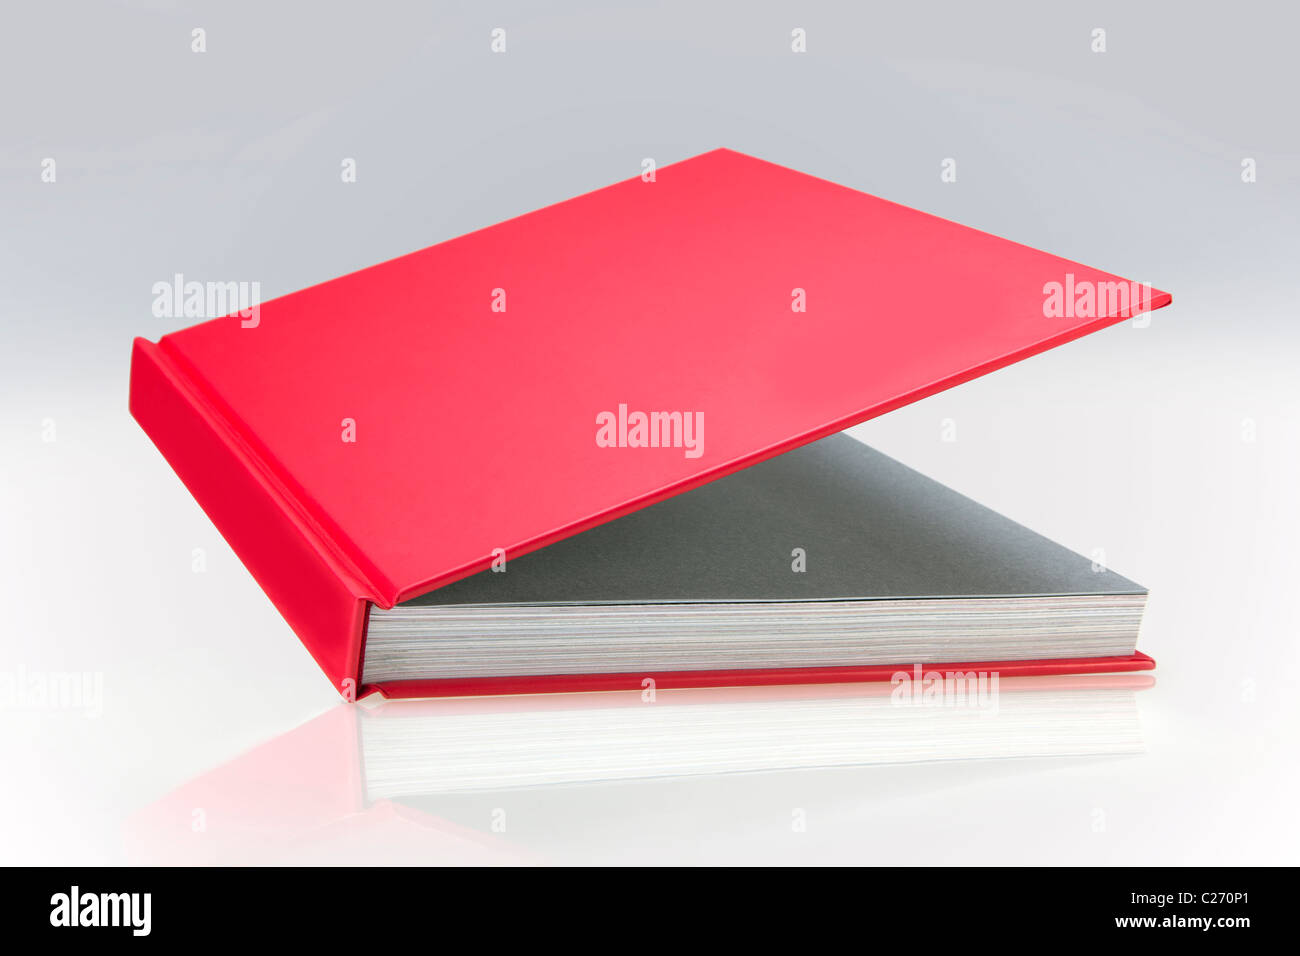 Red book, open, with plain hard cover, for design layout Stock Photo